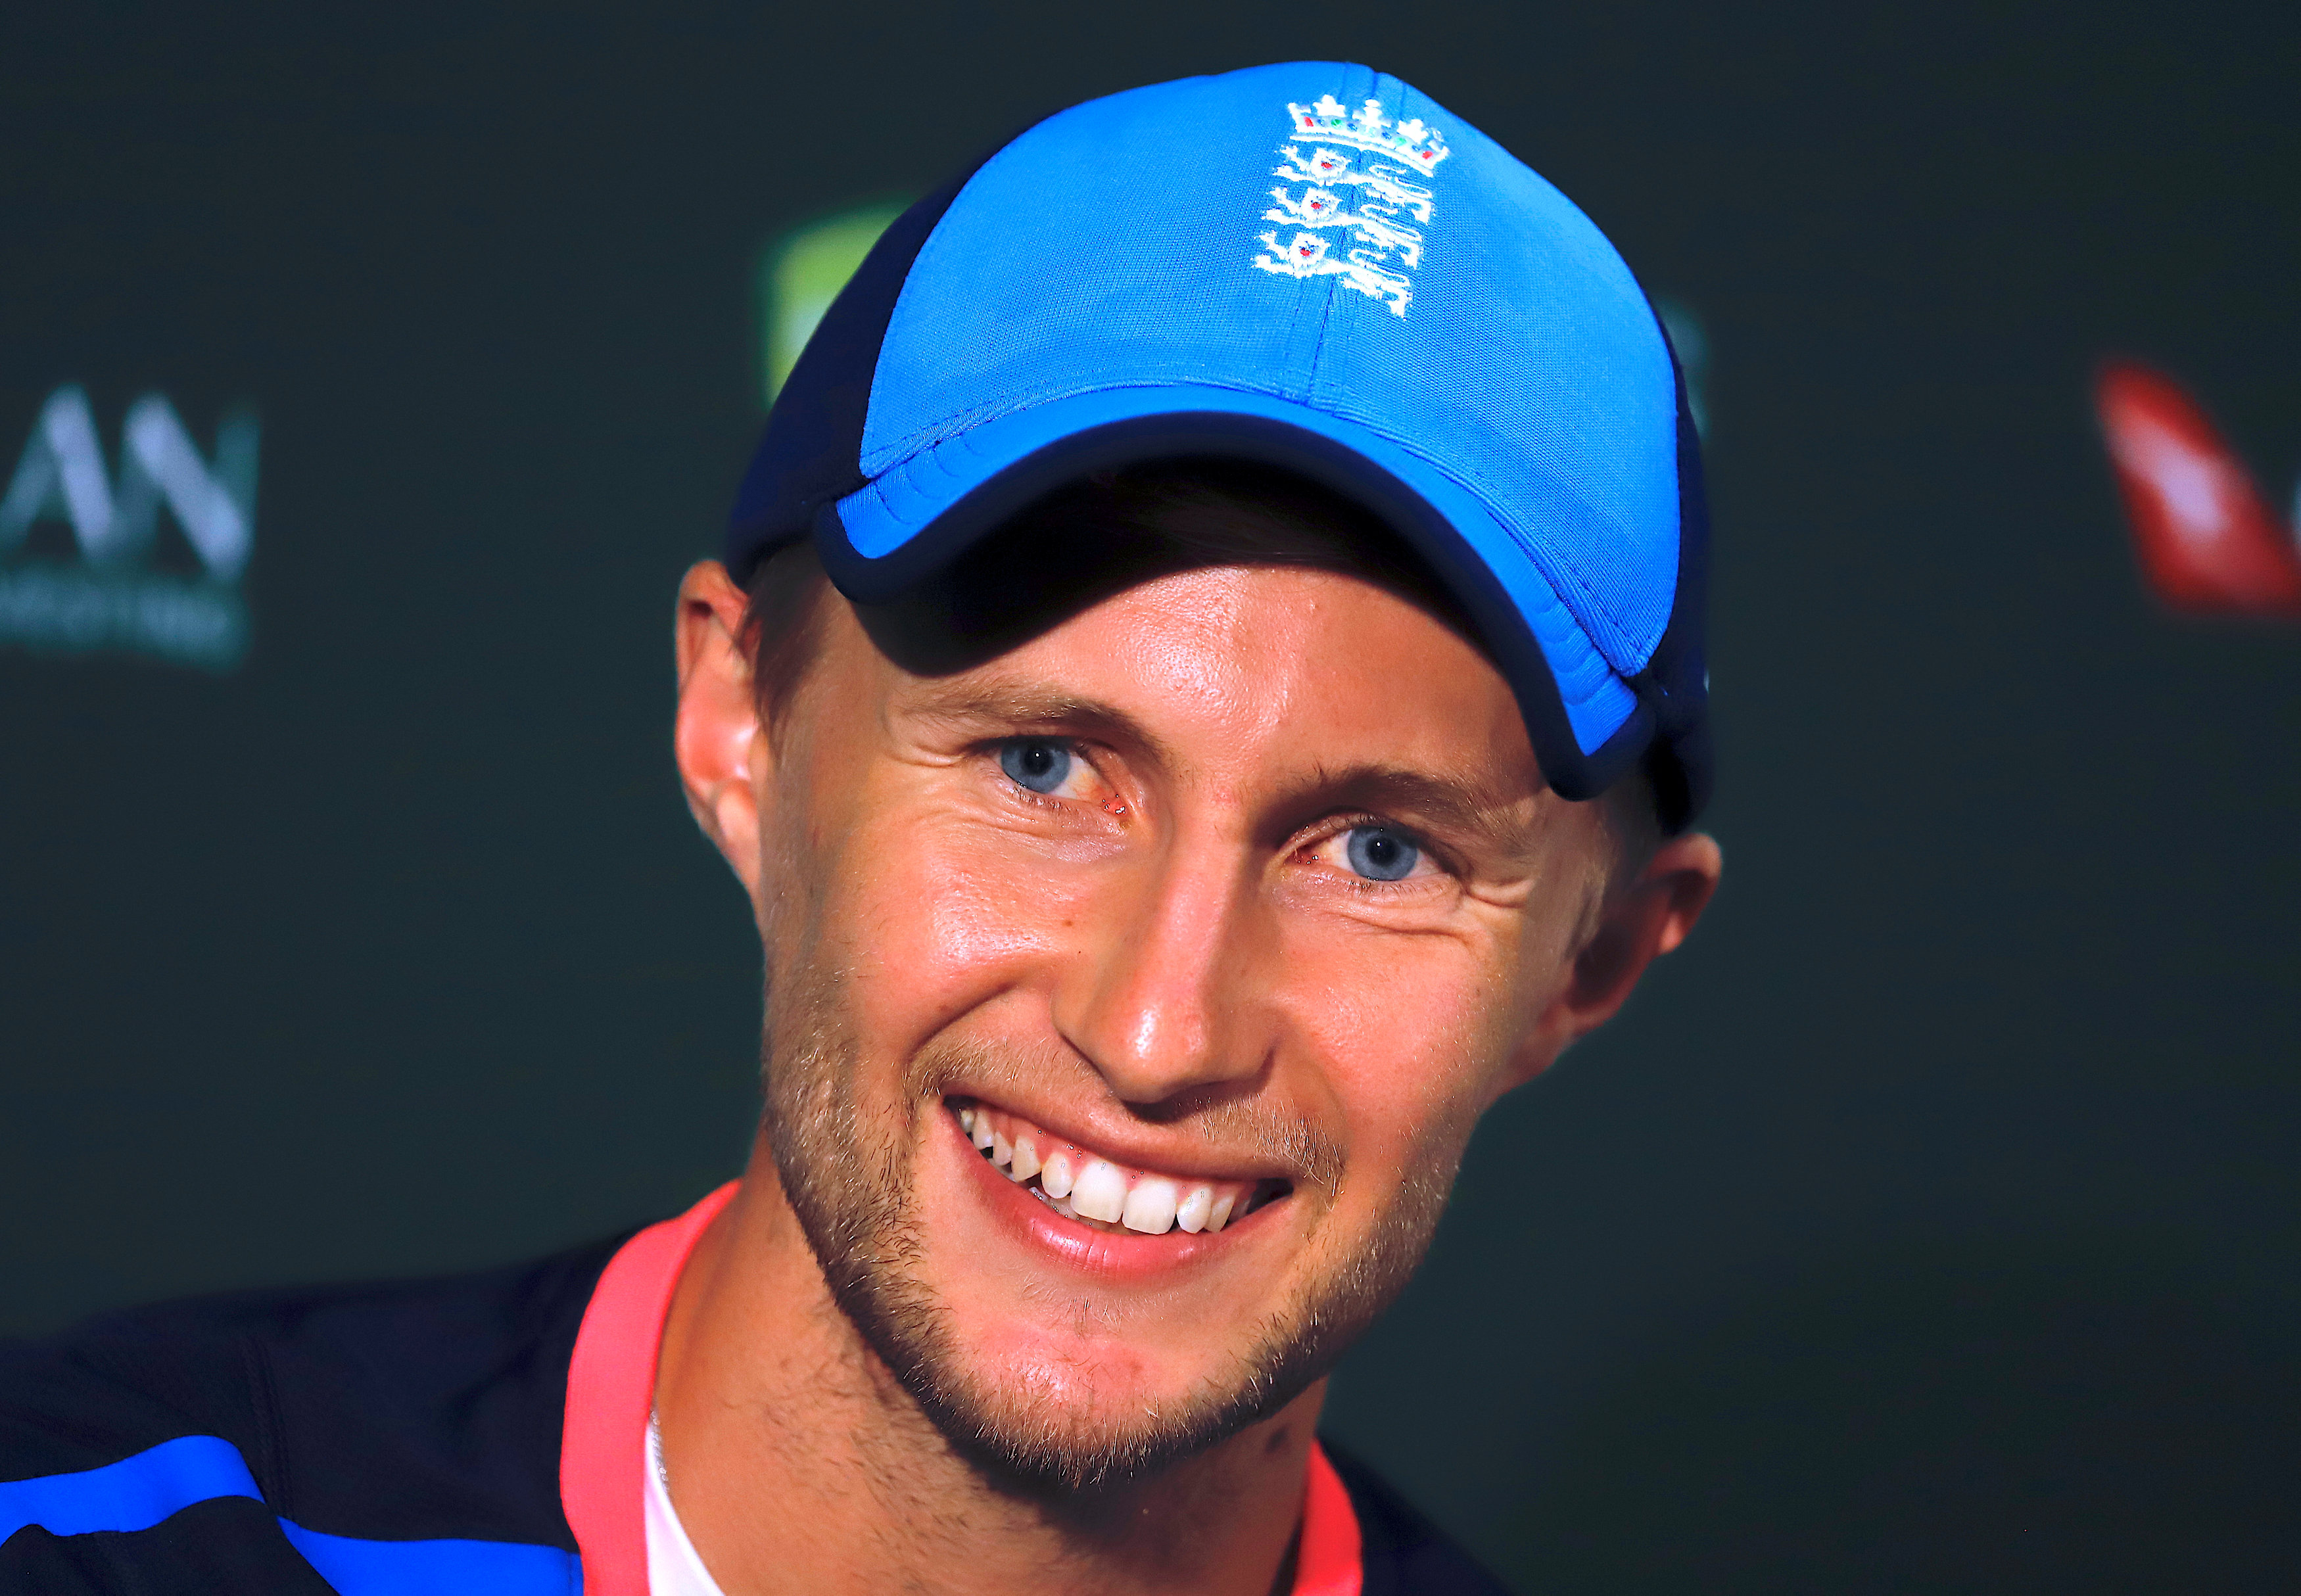 Cricket: Root wants focus on England's cricket, not culture